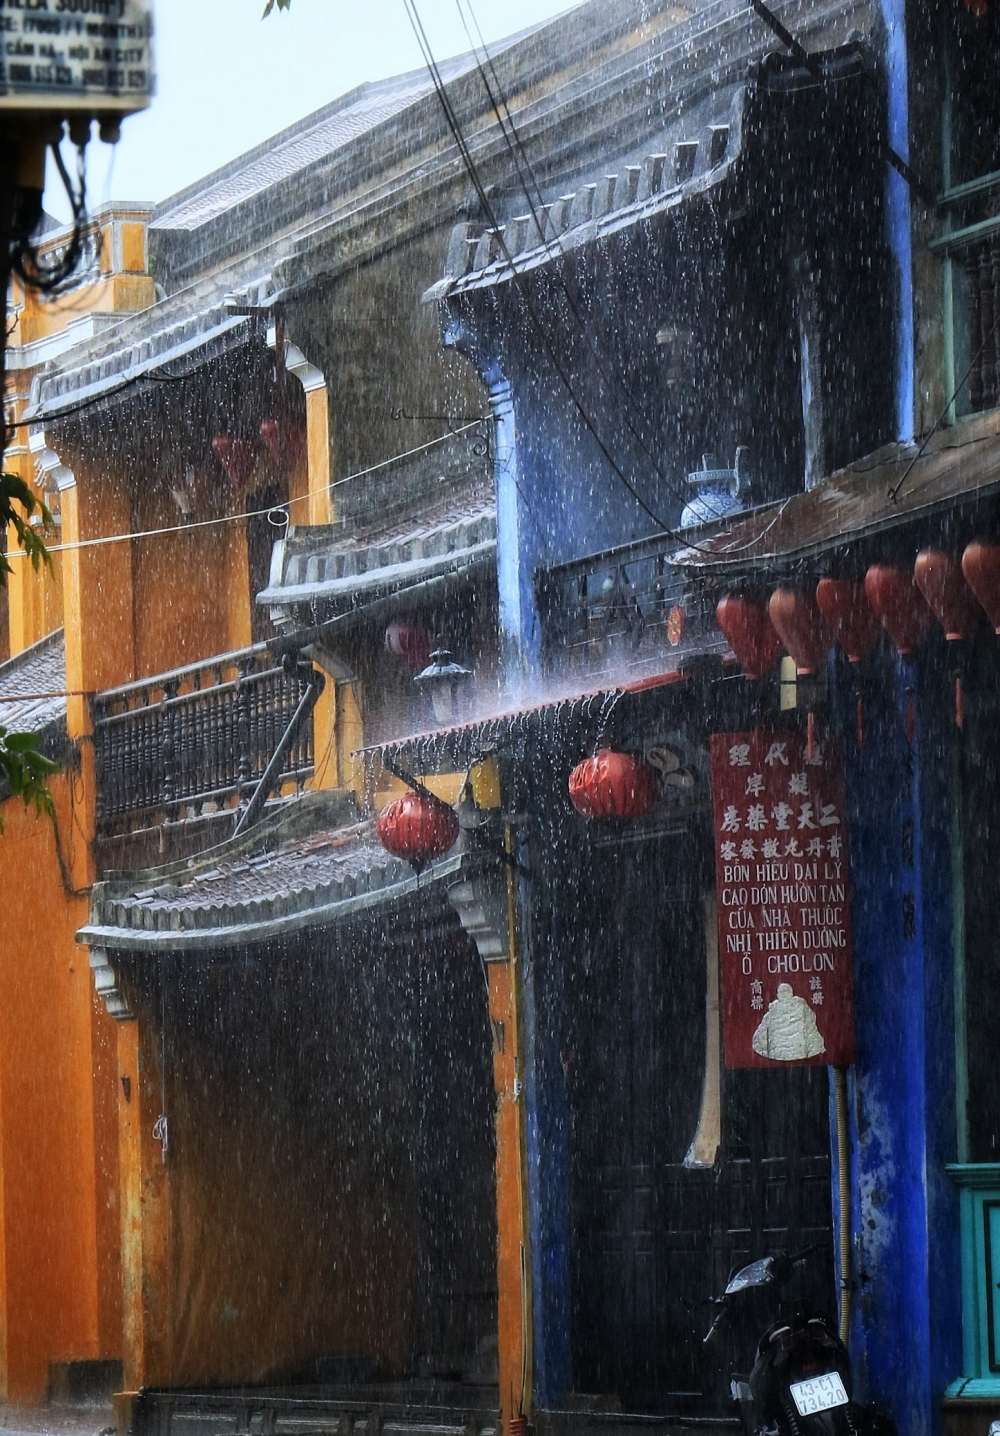 Hoi An Ancient Town inundated by severe flooding